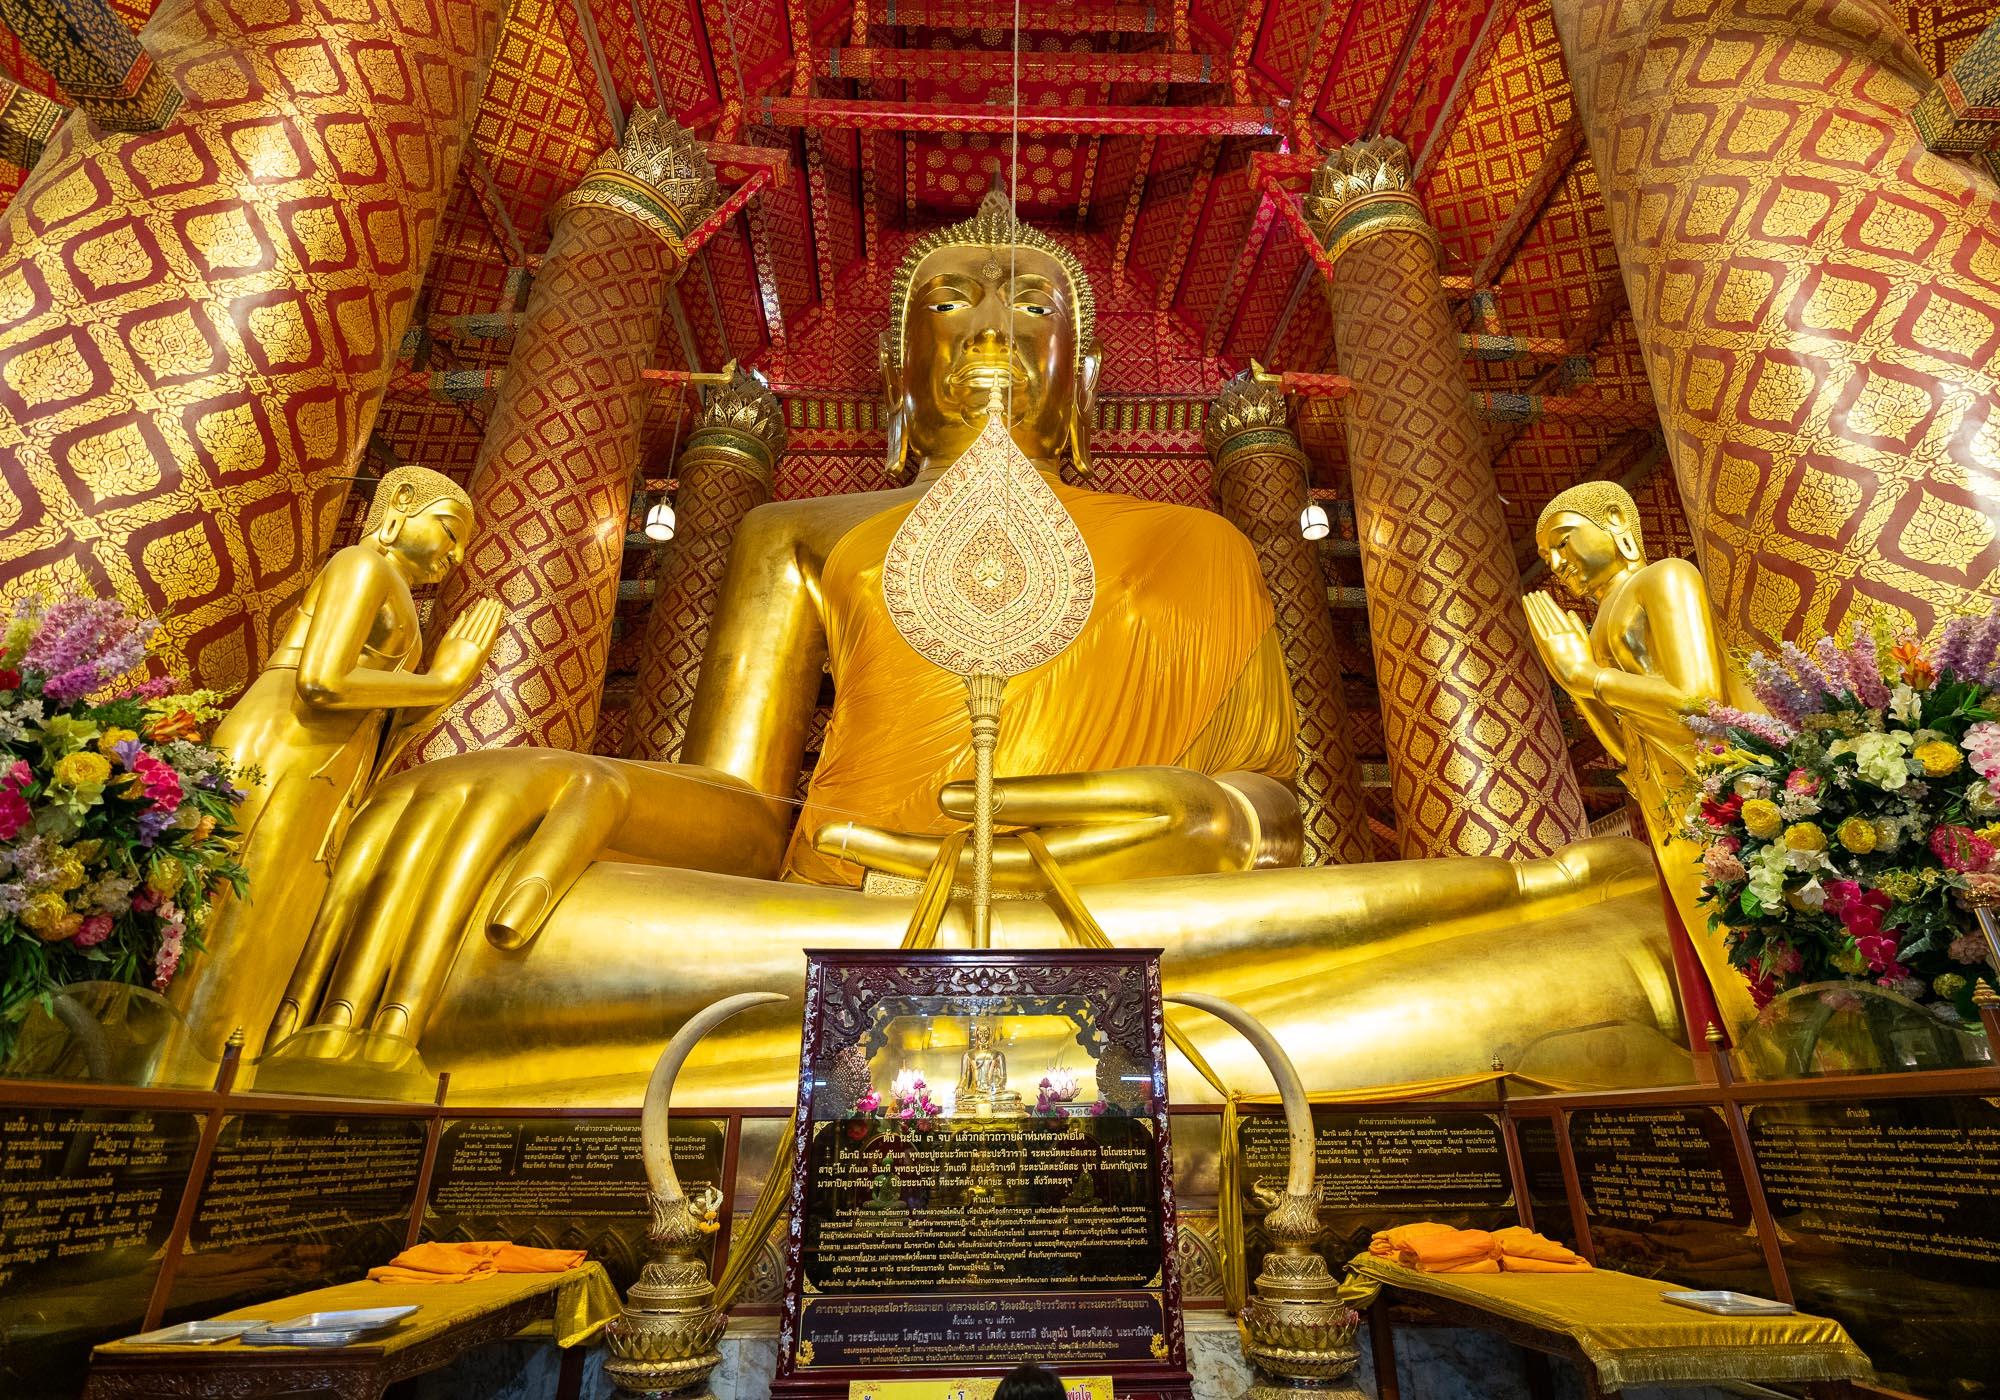 The 19-metre-high gold-covered Buddha statue in Wat Phanan Choeng, one of the most popular sites for worship in the city. – © Michael Turtle